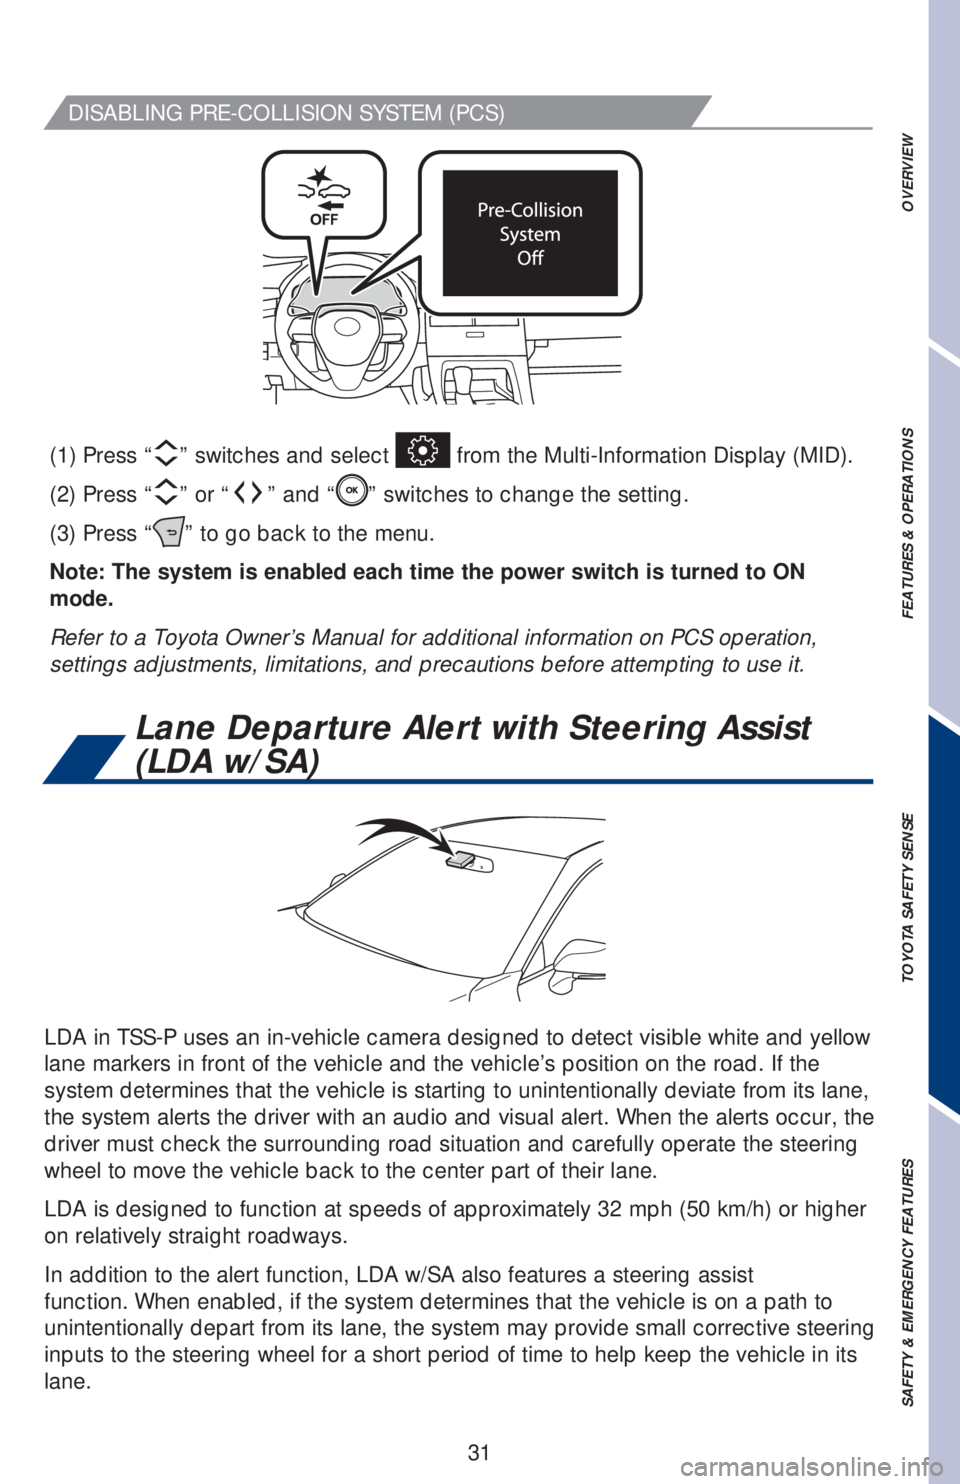 TOYOTA AVALON HYBRID 2019  Owners Manual (in English) 31
DISABLING PRE-COLLISION SYSTEM (PCS)
LDA in TSS-P uses an in-vehicle camera designed to detect visible white and yellow 
lane markers in front of the vehicle and the vehicle’s position on the roa